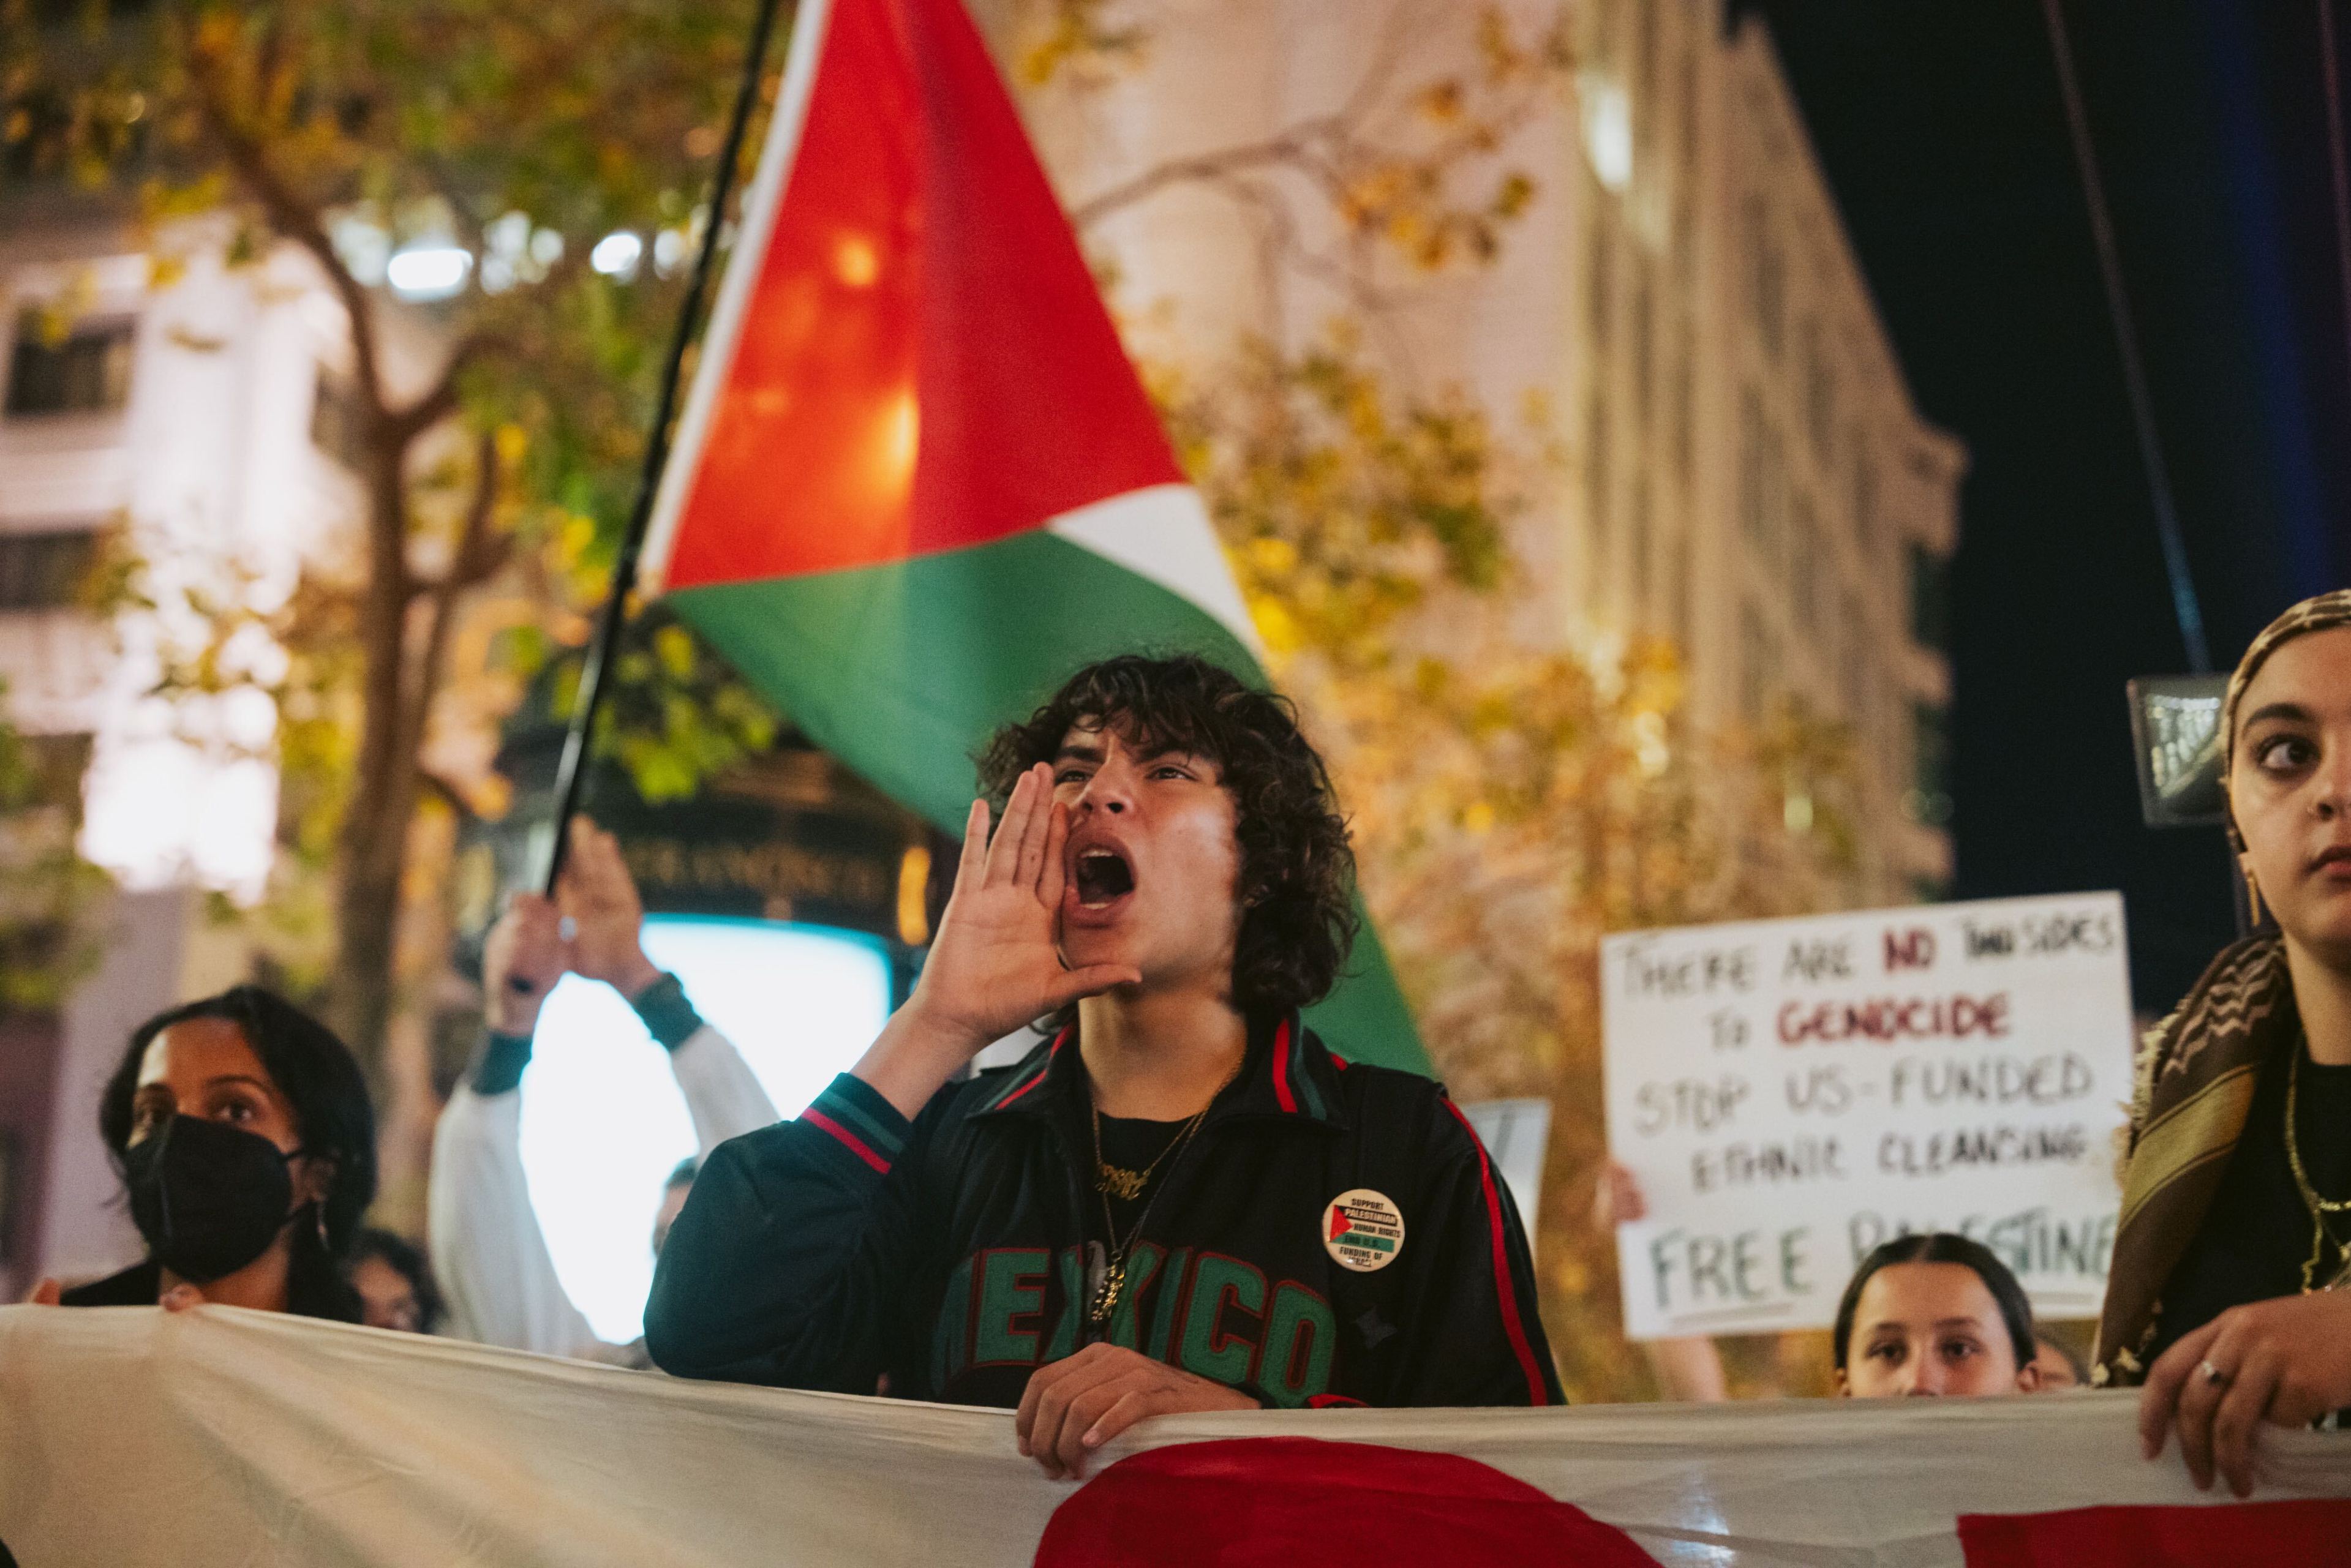 A person chanting at a protest while holding a banner and marching beside a Palestinian flag.